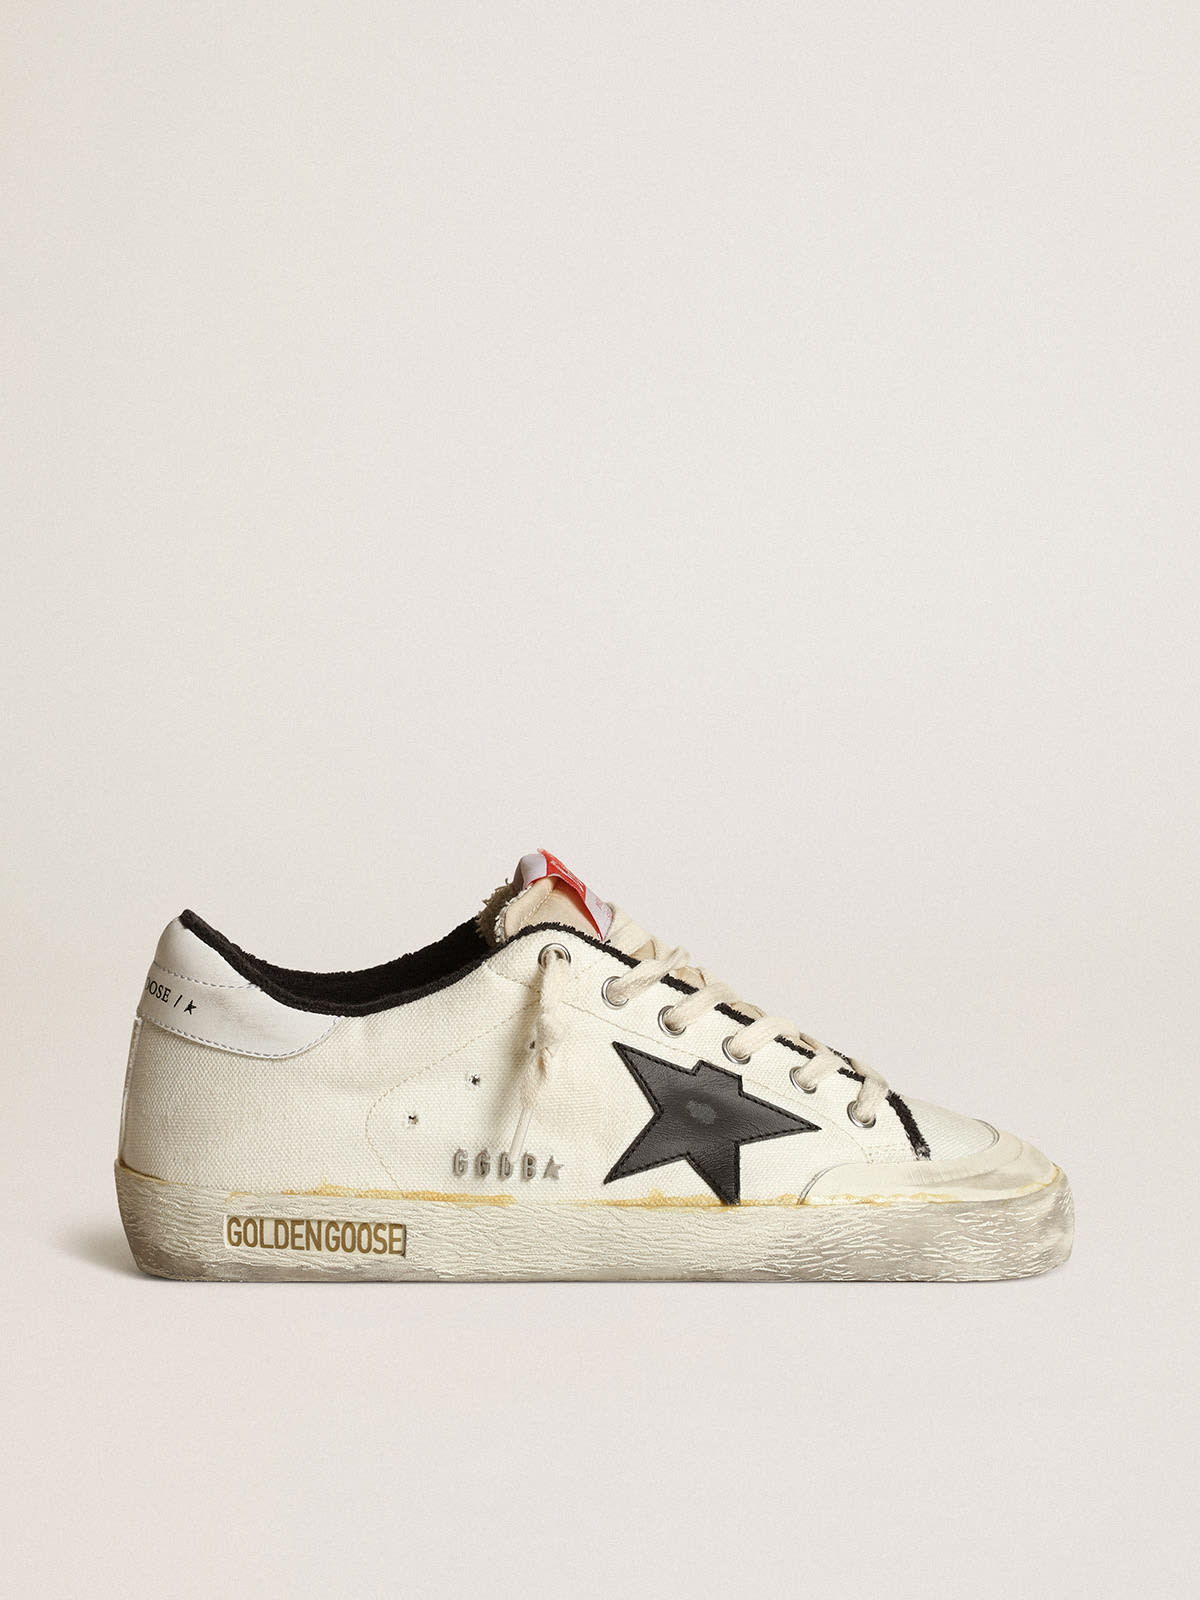 Golden Goose - Women’s Super-Star LTD sneakers in beige canvas with black leather star and white leather heel tab in 